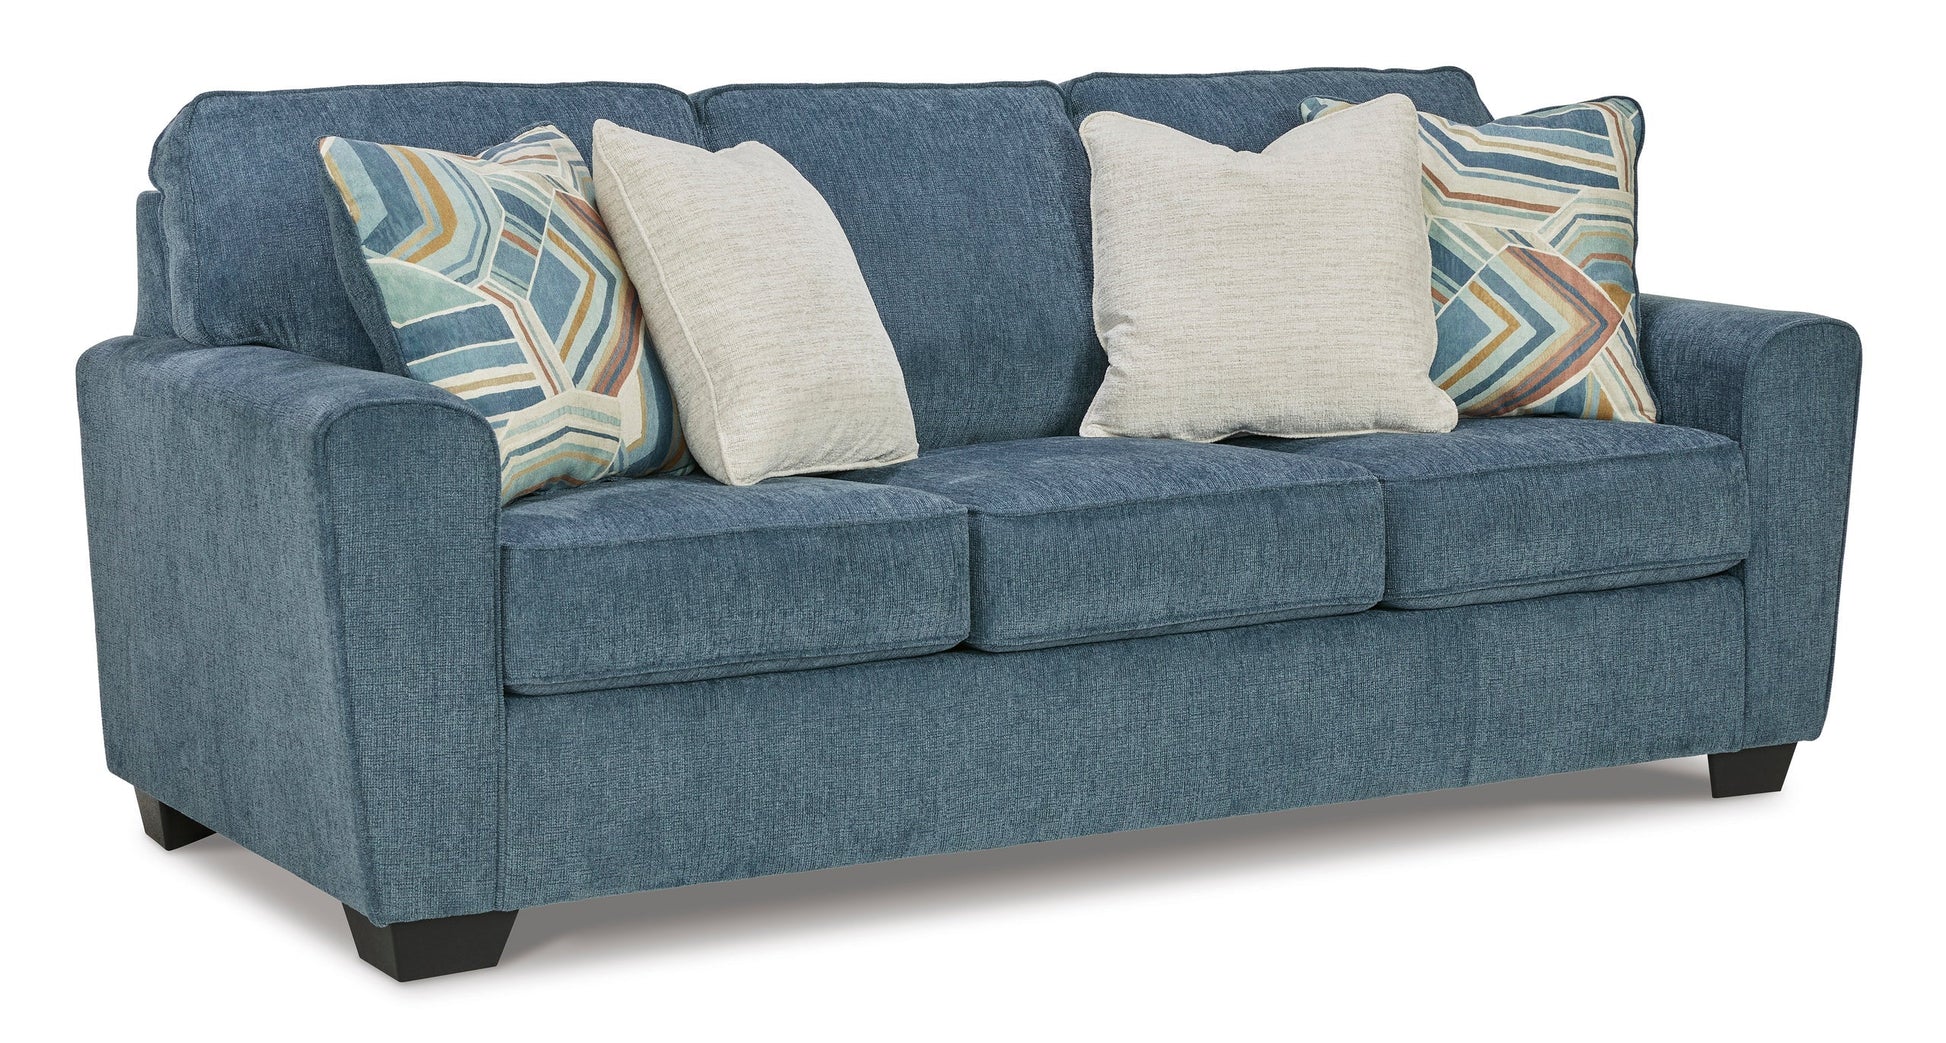 Blue Modern Contemporary Faux Wood Fabric Polyester Upholstered Queen Sofa Sleeper